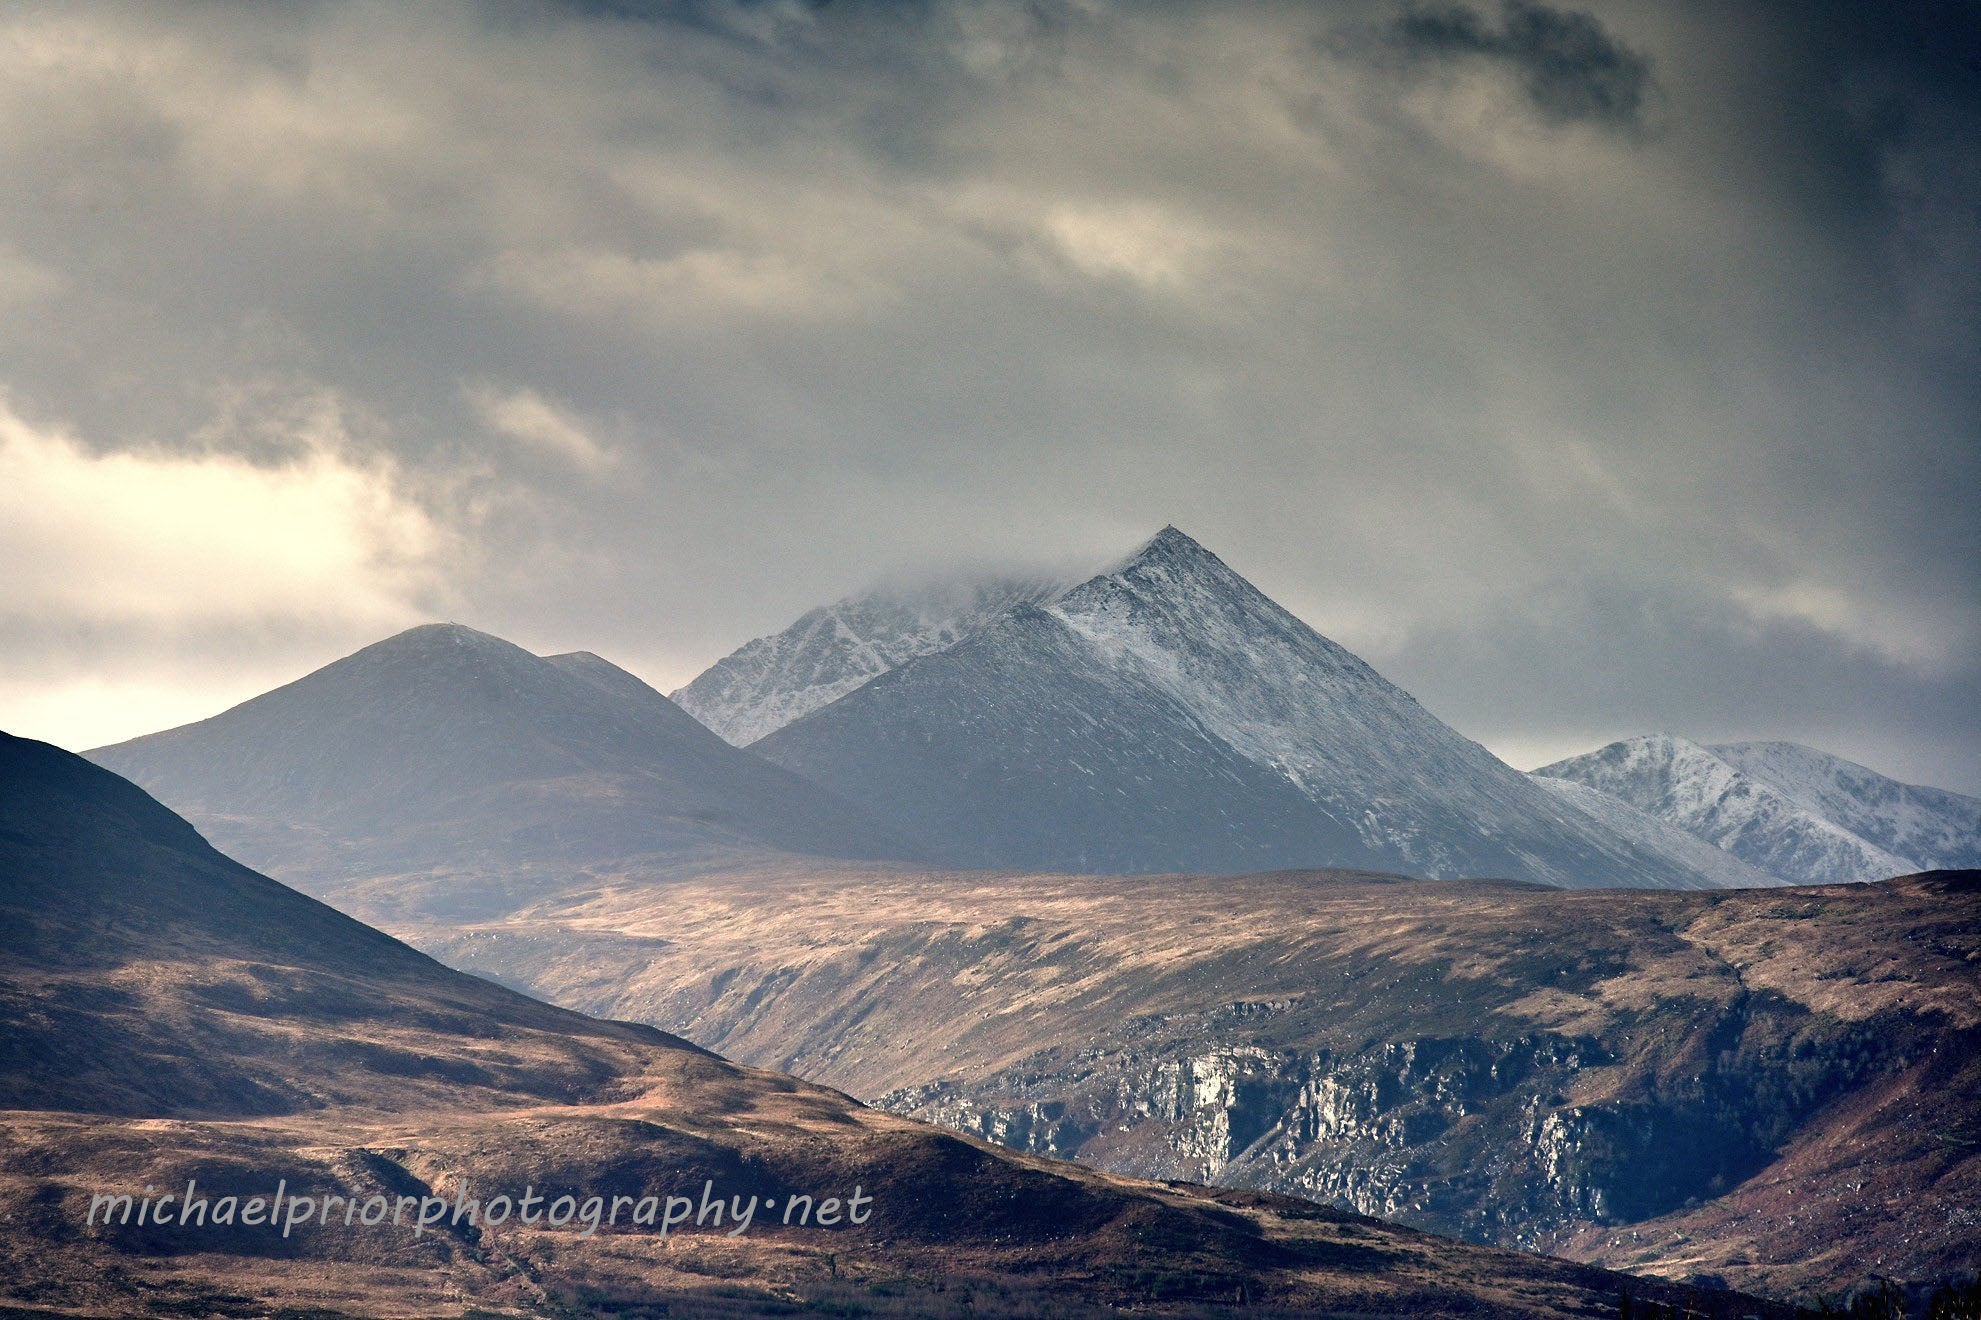 Winter colours at the Macgillycuddy's reeks in Kerry